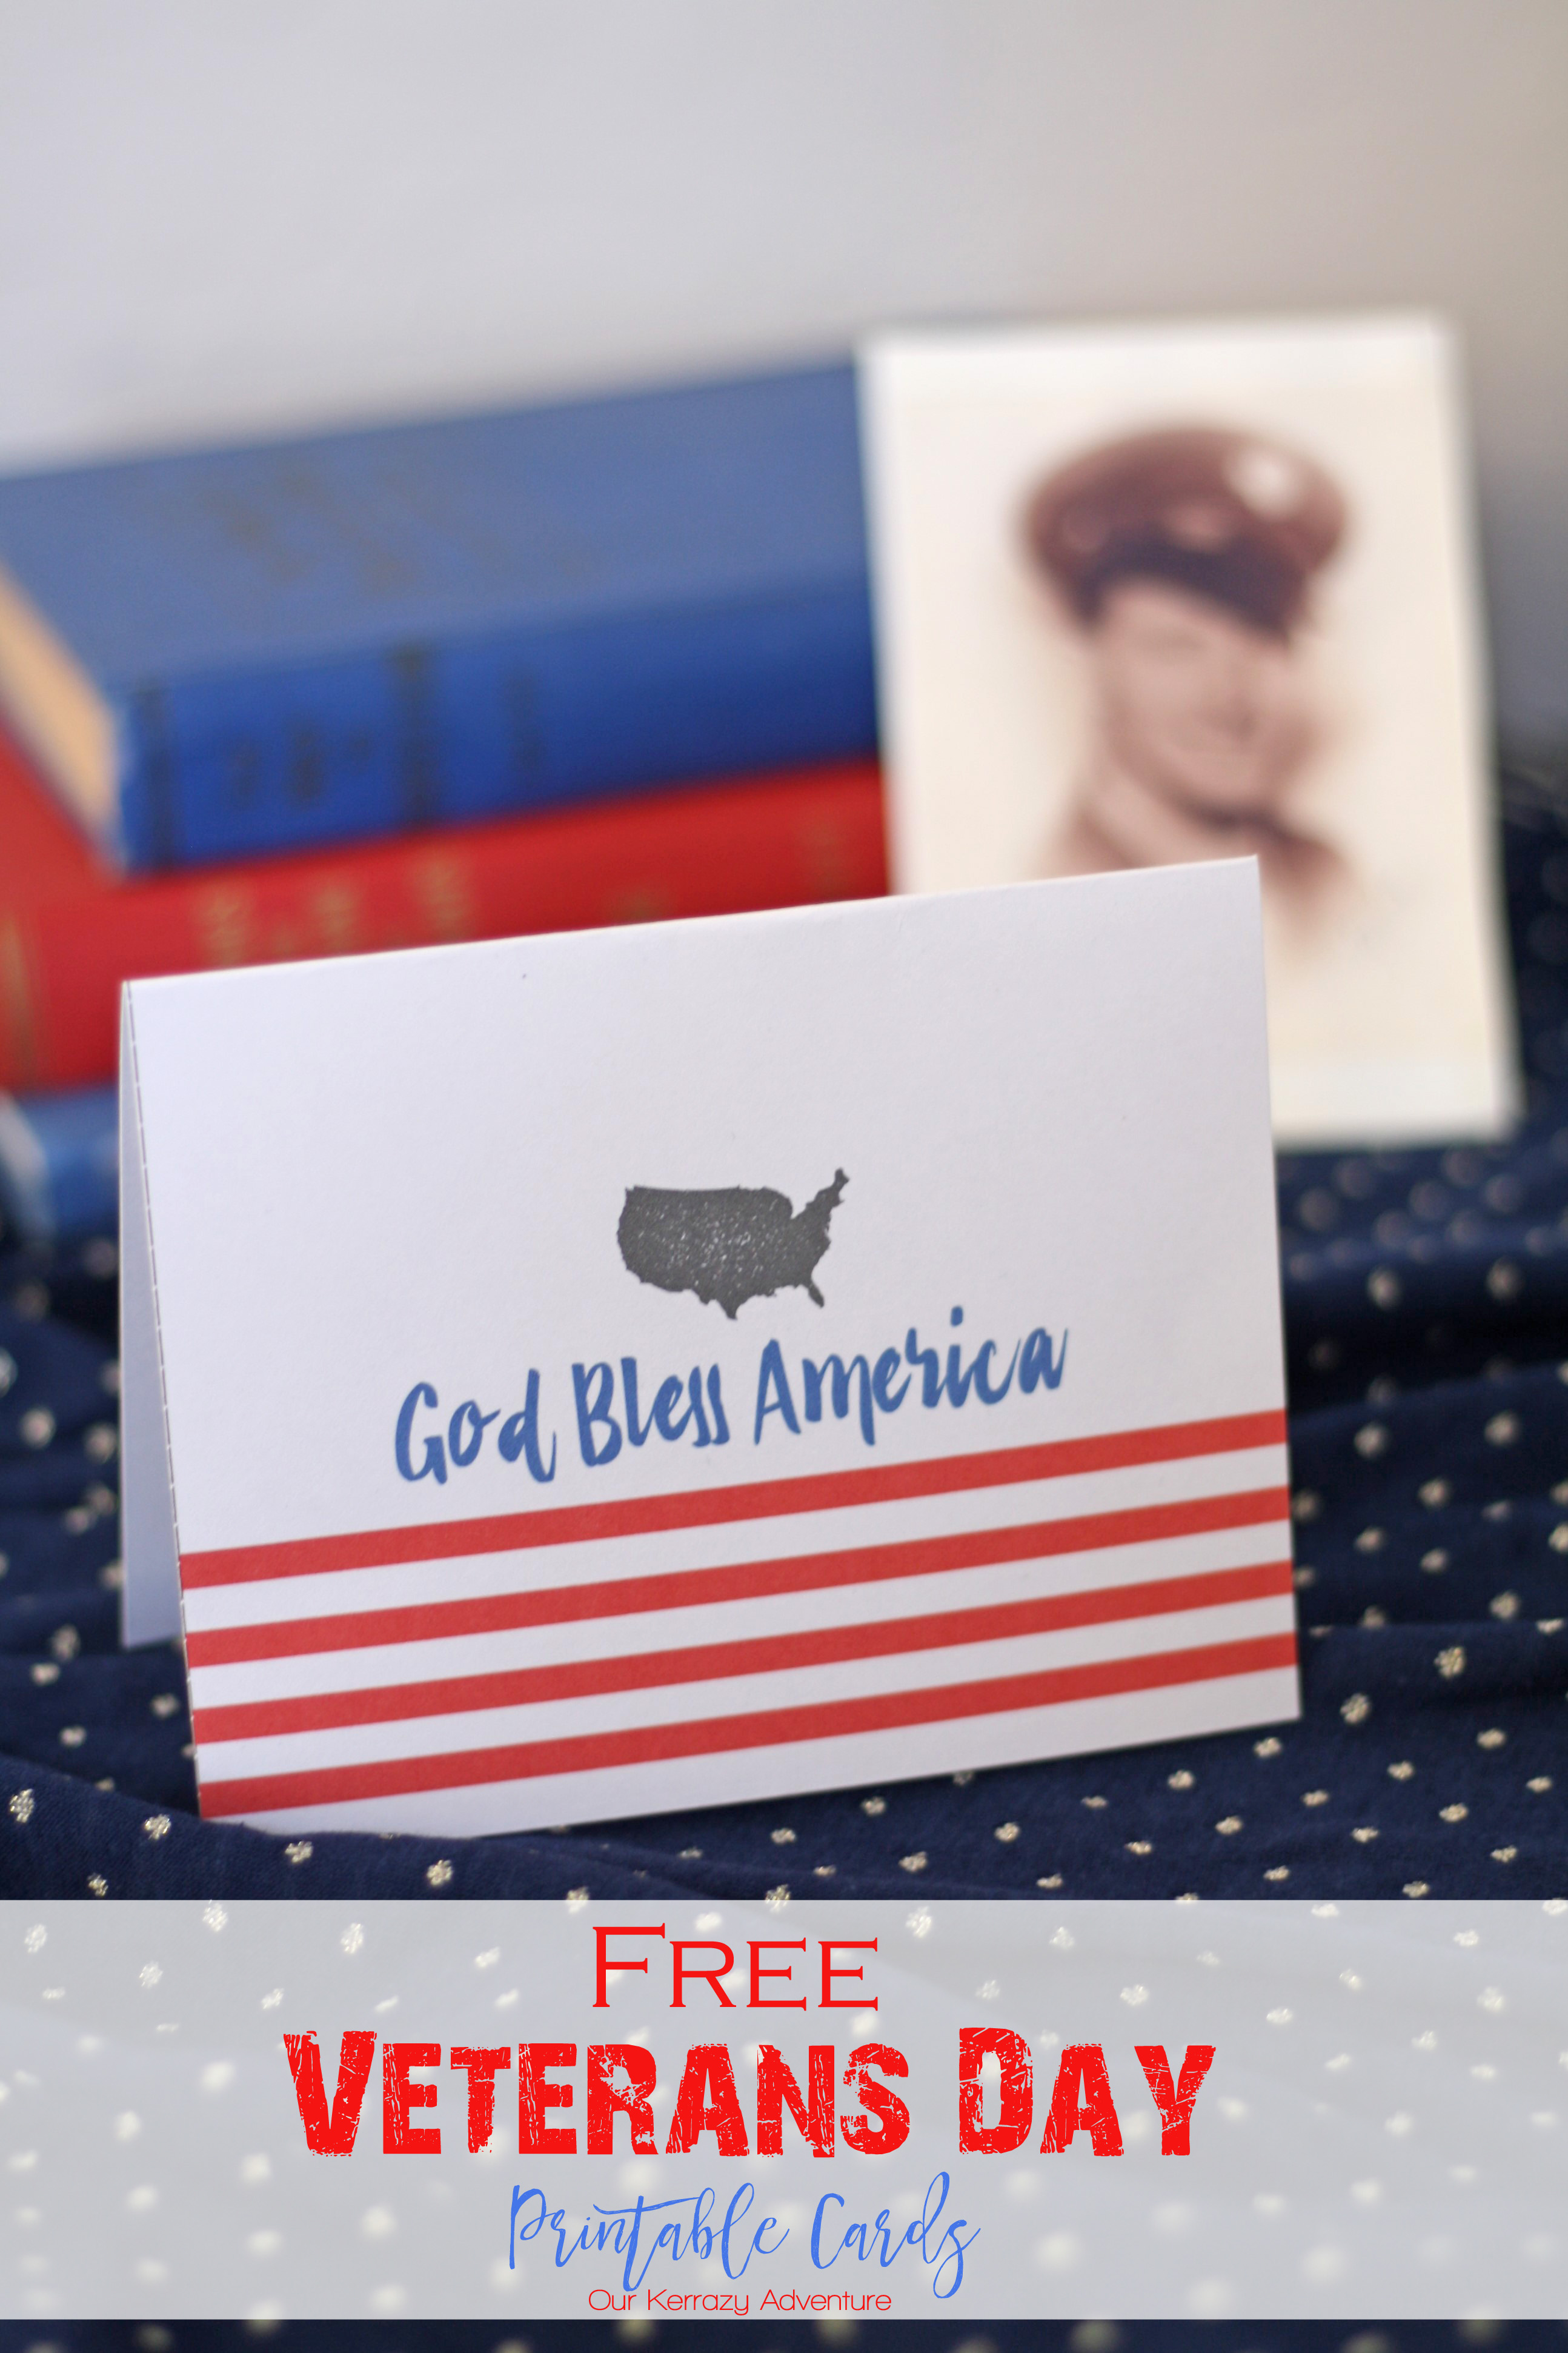 Free Veterans Day Cards Printable Web Free Veterans Day Greeting Card